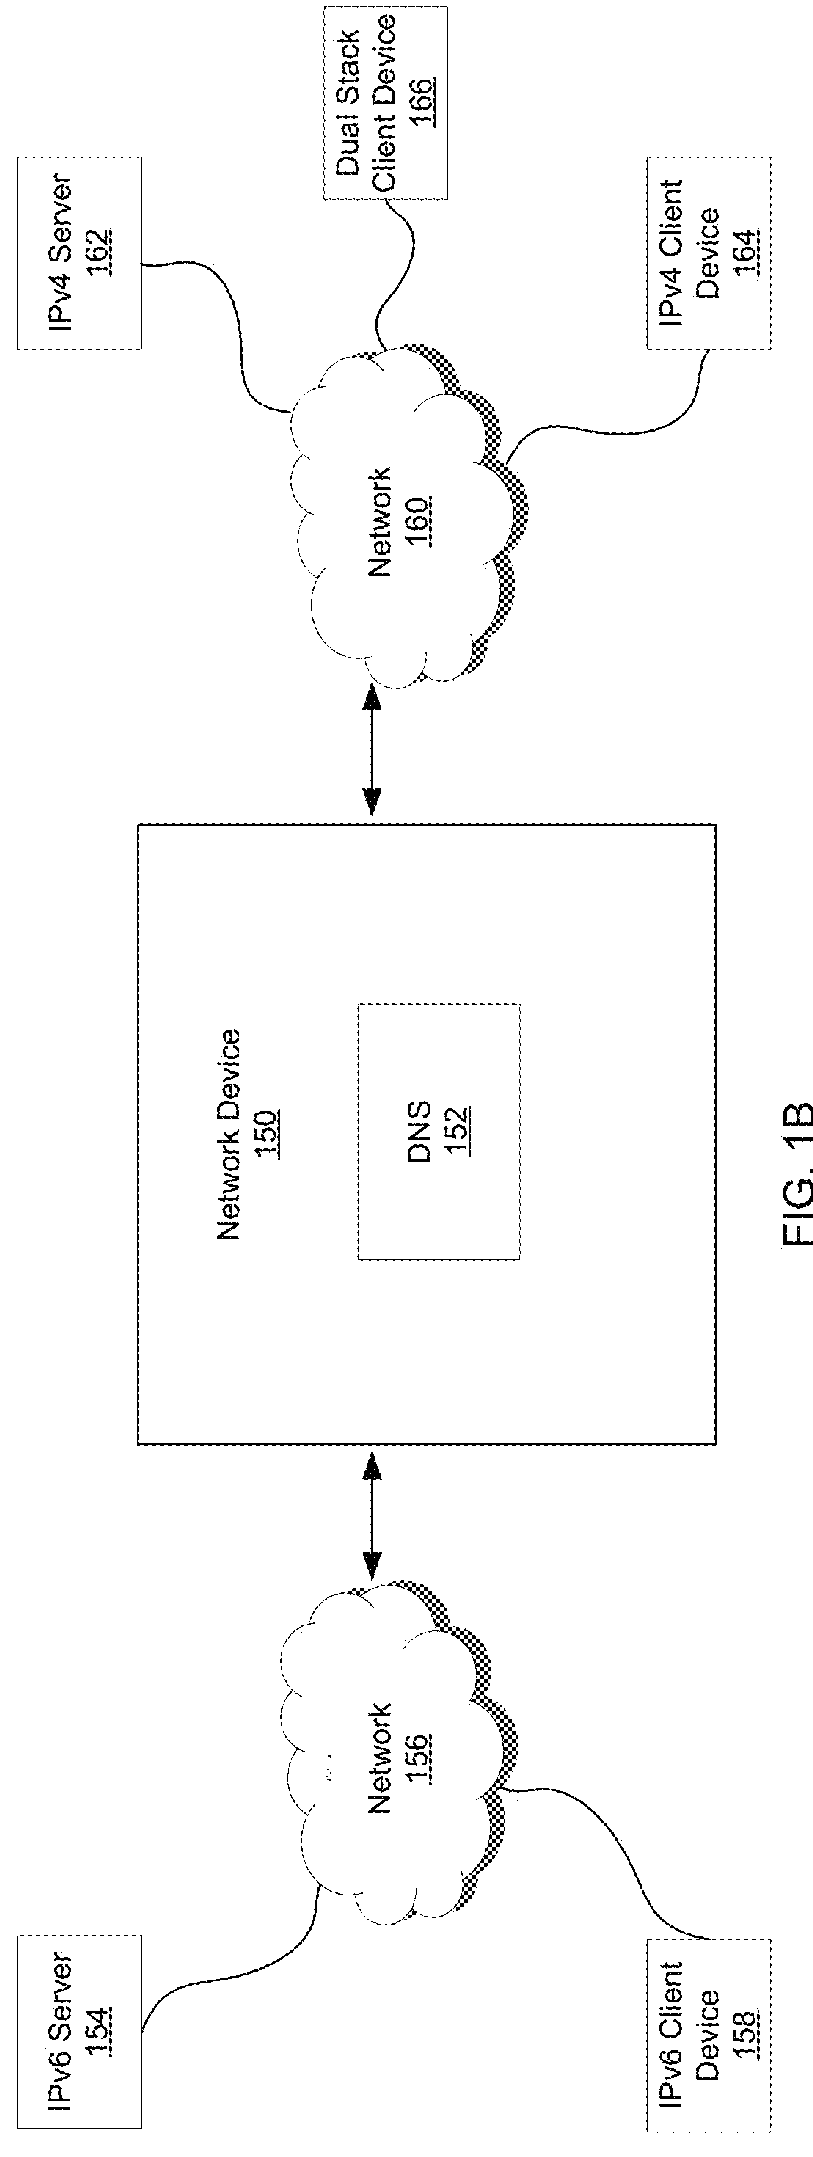 Dns-enabled communication between heterogeneous devices